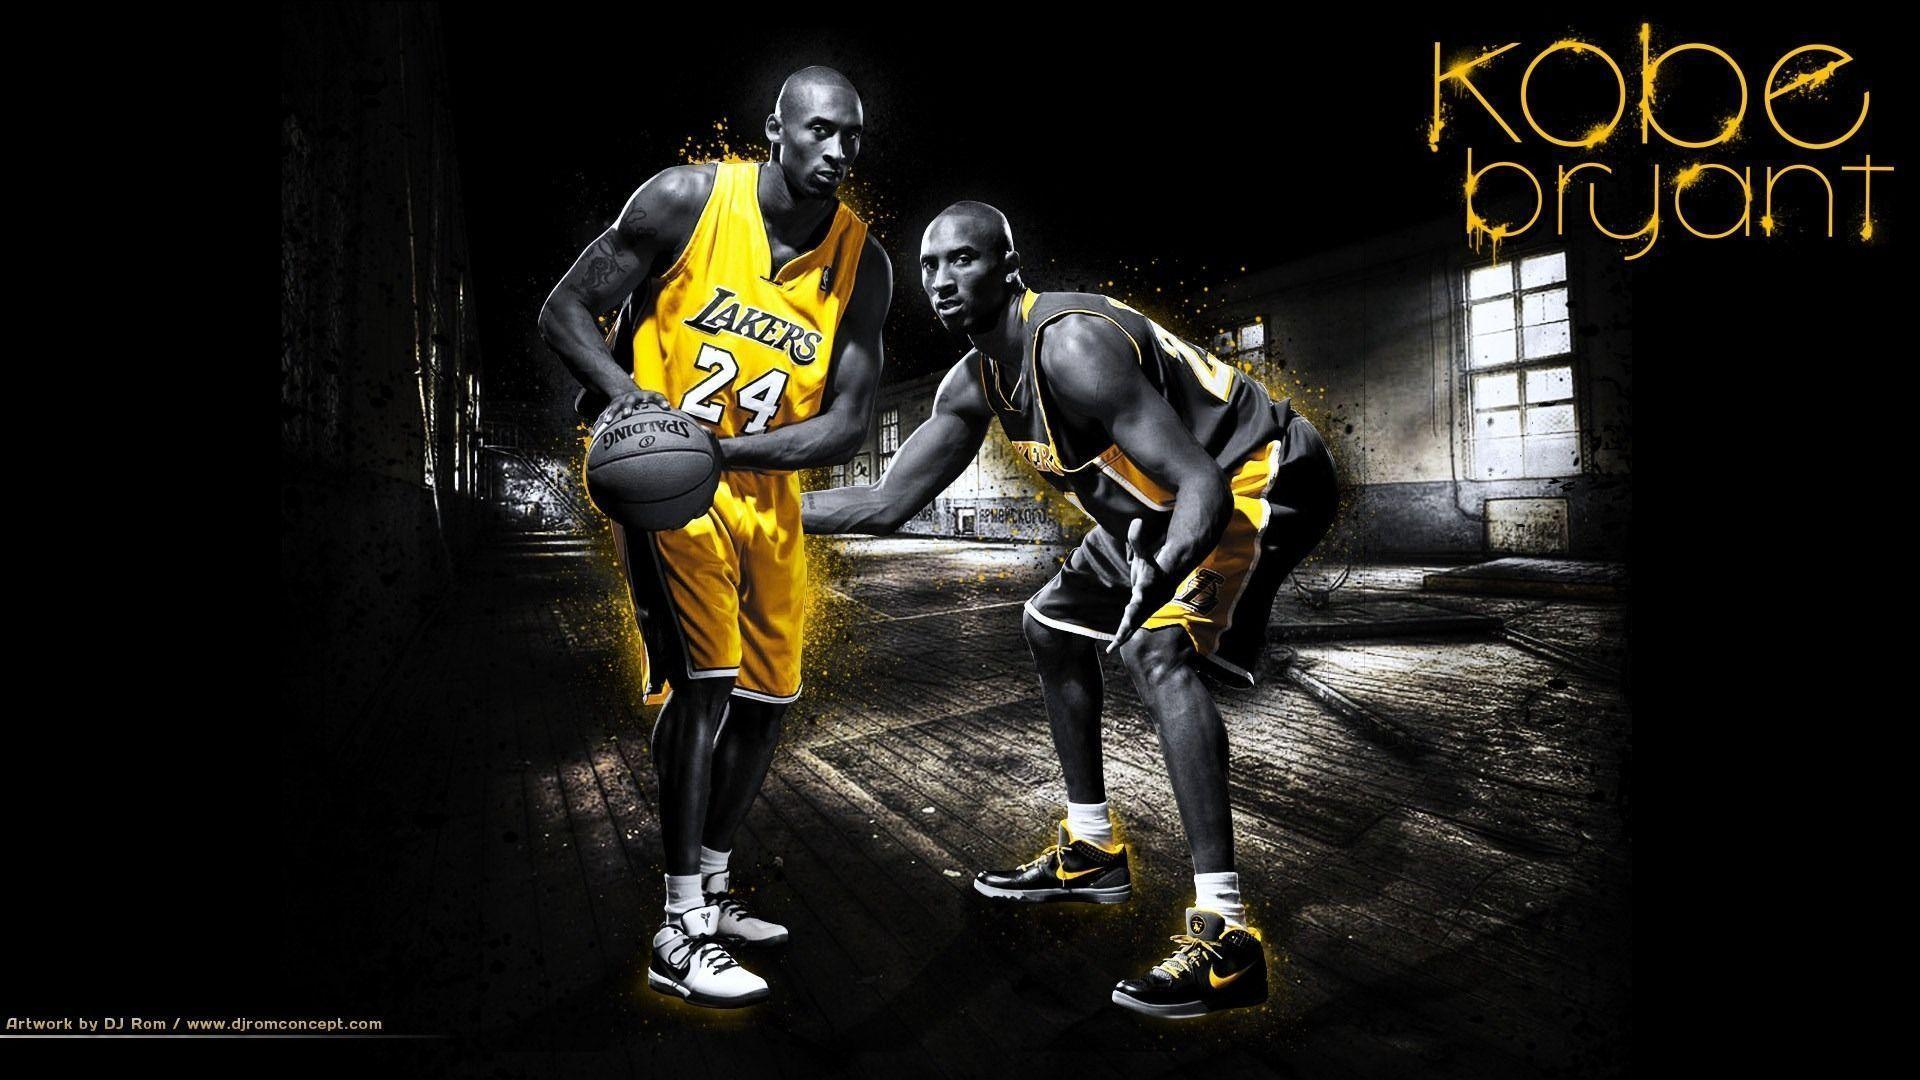 Free Los Angeles Lakers background image. Los Angeles Lakers